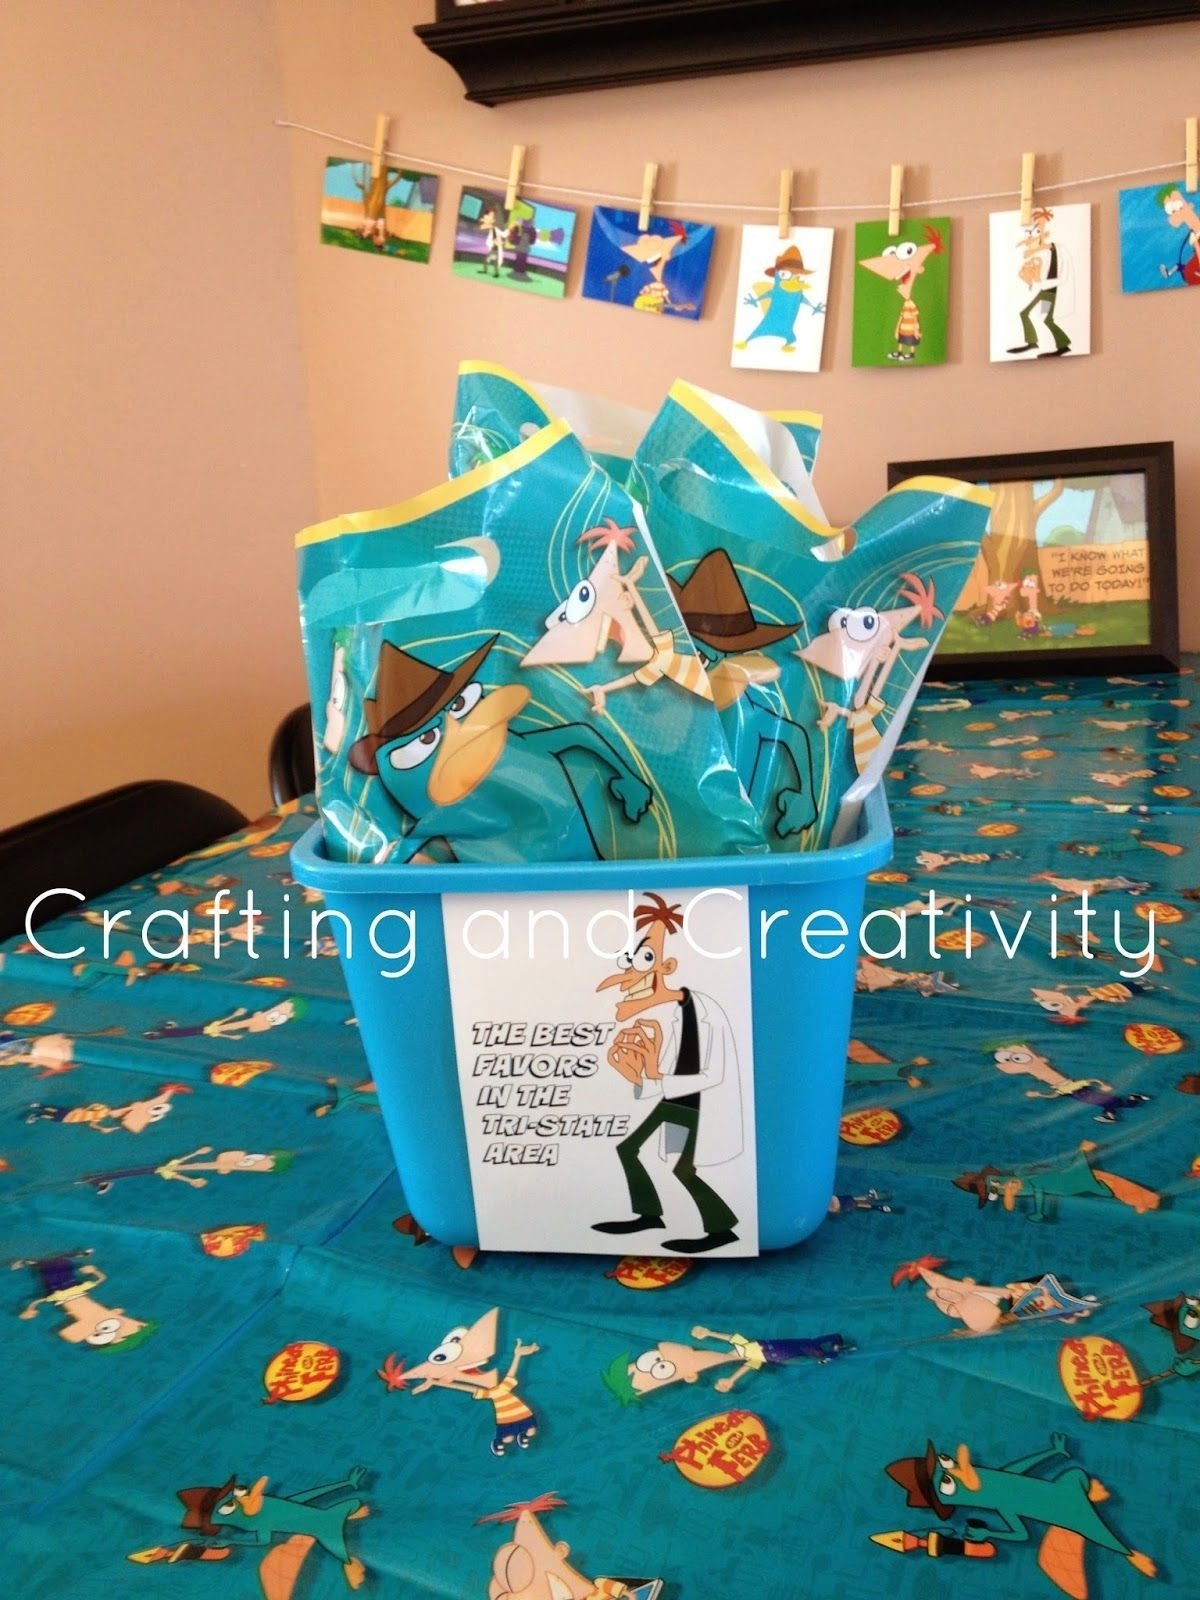 10 Elegant Phineas And Ferb Birthday Party Ideas crafting and creativity my sons 7th birthday party phineas and 2 2022